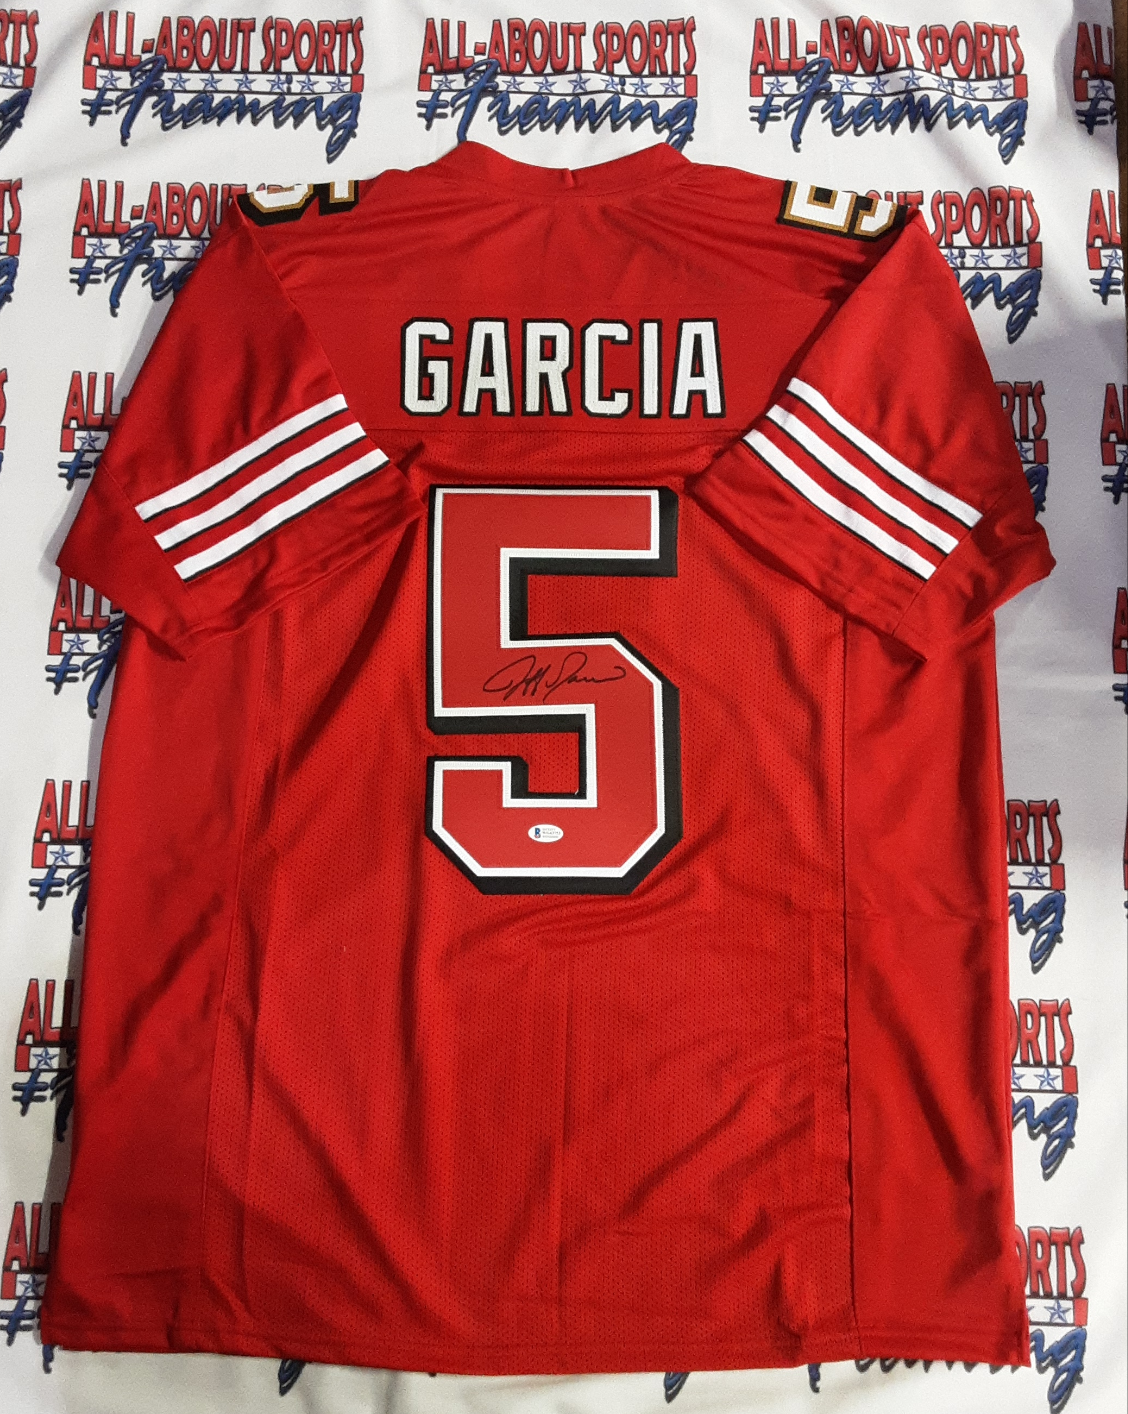 Jeff Garcia Autographed/Signed Pro Style Red XL Jersey BAS